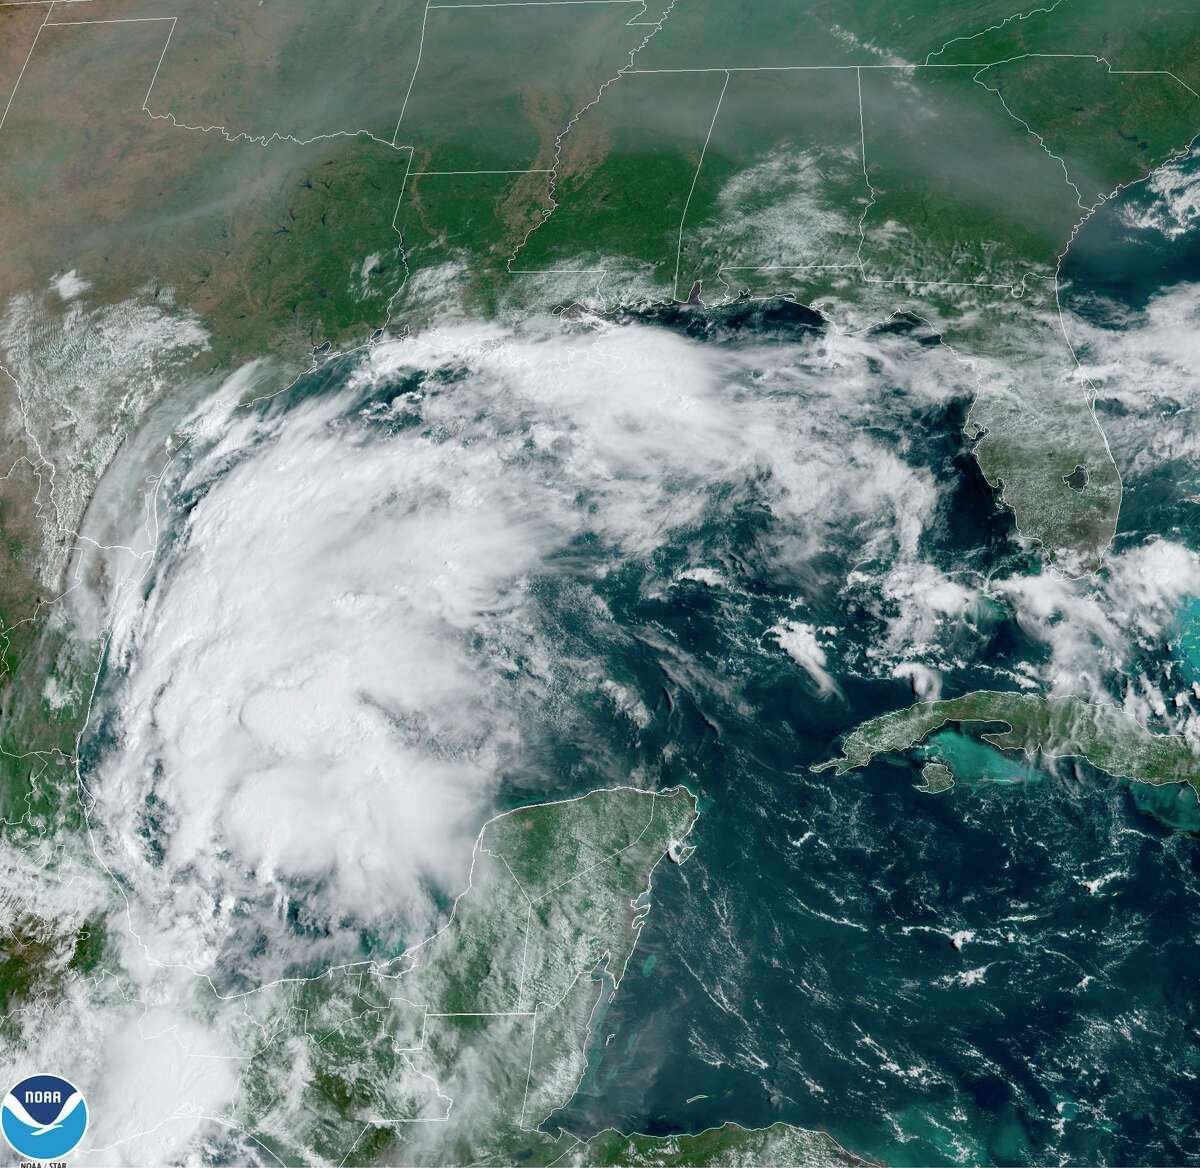 This satellite image provided by NOAA shows Tropical Storm Nicholas in the Gulf of Mexico on Sunday, Sept. 12, 2021. Tropical storm warnings have been issued for coastal Texas and the northeast coast of Mexico. Nicholas is expected to produce storm total rainfall of 5 to 10 inches, with isolated maximum amounts of 15 inches, across portions of coastal Texas into southwest Louisiana Sunday, Sept. 12 through midweek.